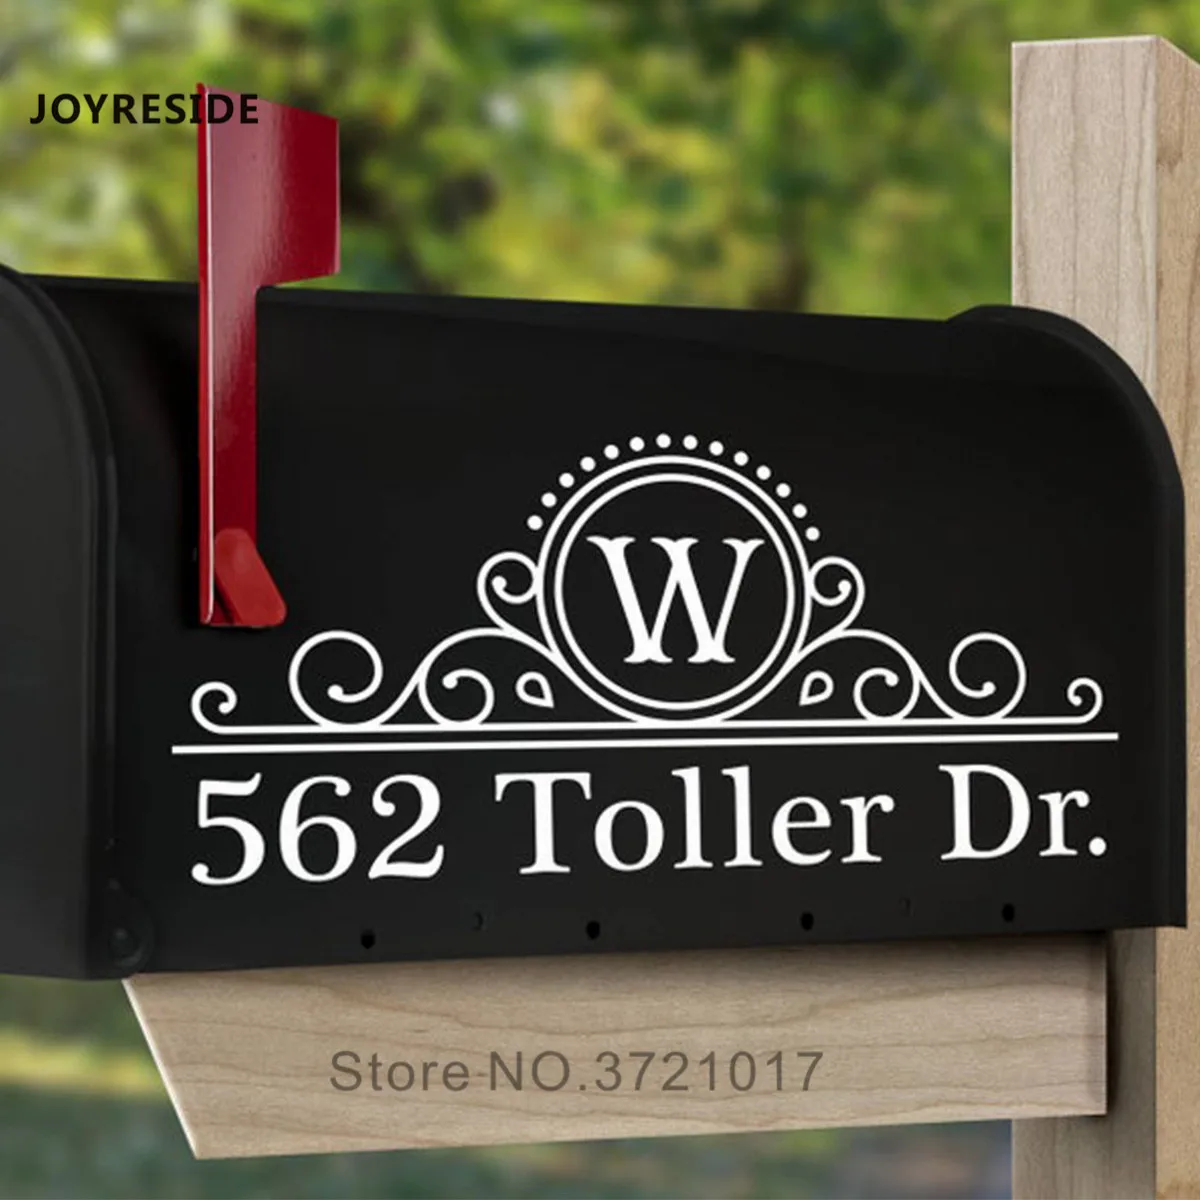 Personalized Mailbox Decal Mailbox Vinyl Decals Last Name and Address Decal 